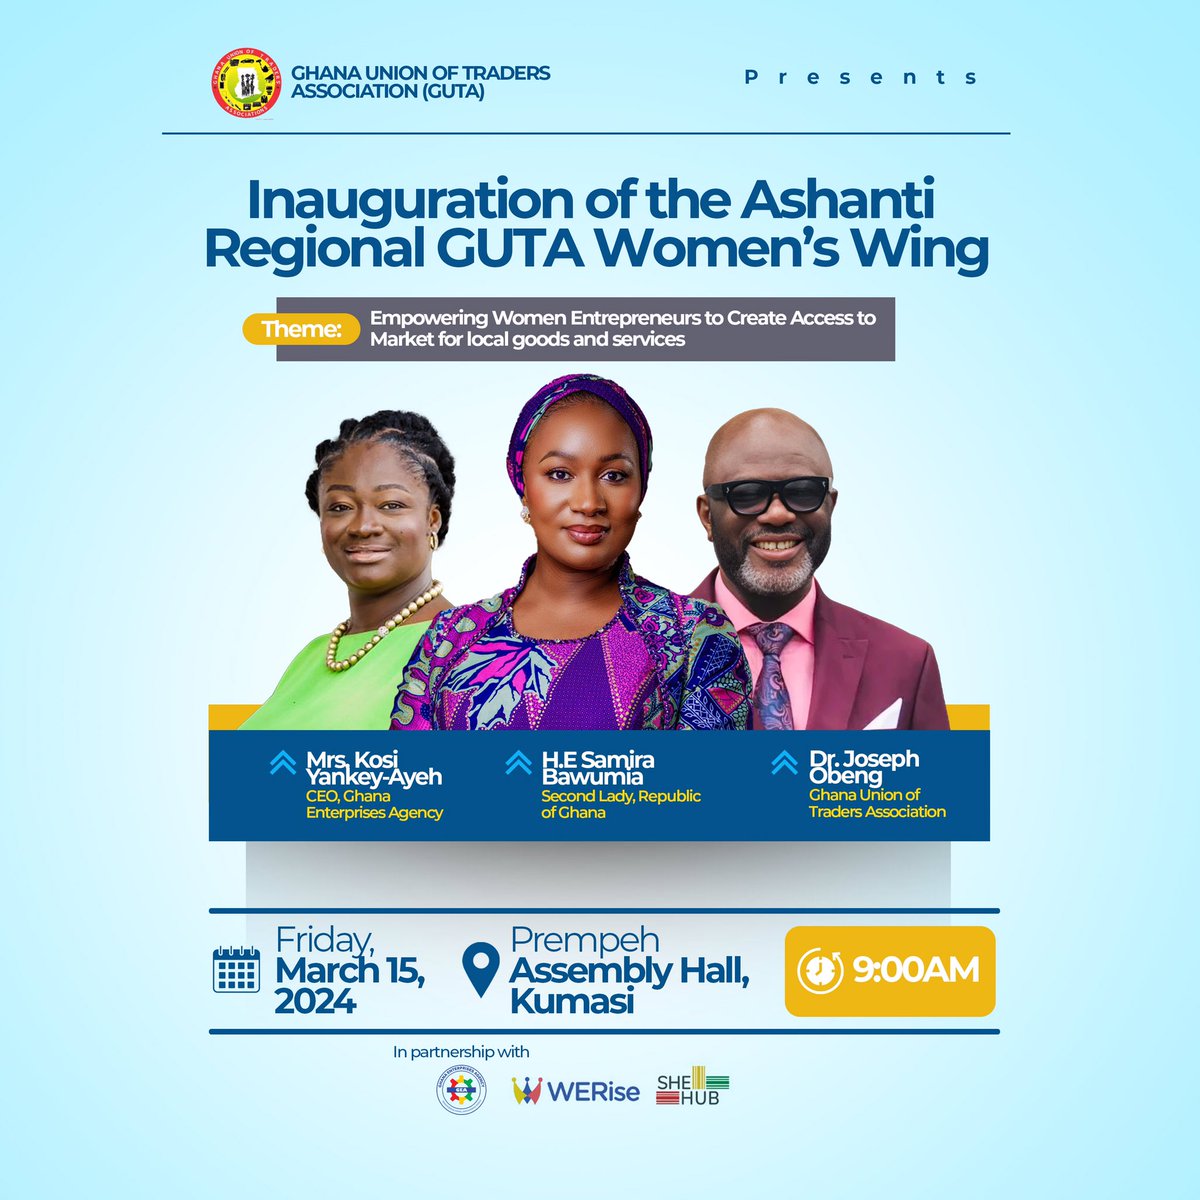 Empowering Women Entrepreneurs: Witness the inauguration of the Ashanti Regional GUTA Women’s Wing, a beacon of empowerment and opportunity for women in business.🇬🇭

#GUTA
#GEA
#BizBox 
#WERise 
#SHEHUB 
#Mastercardfoundation